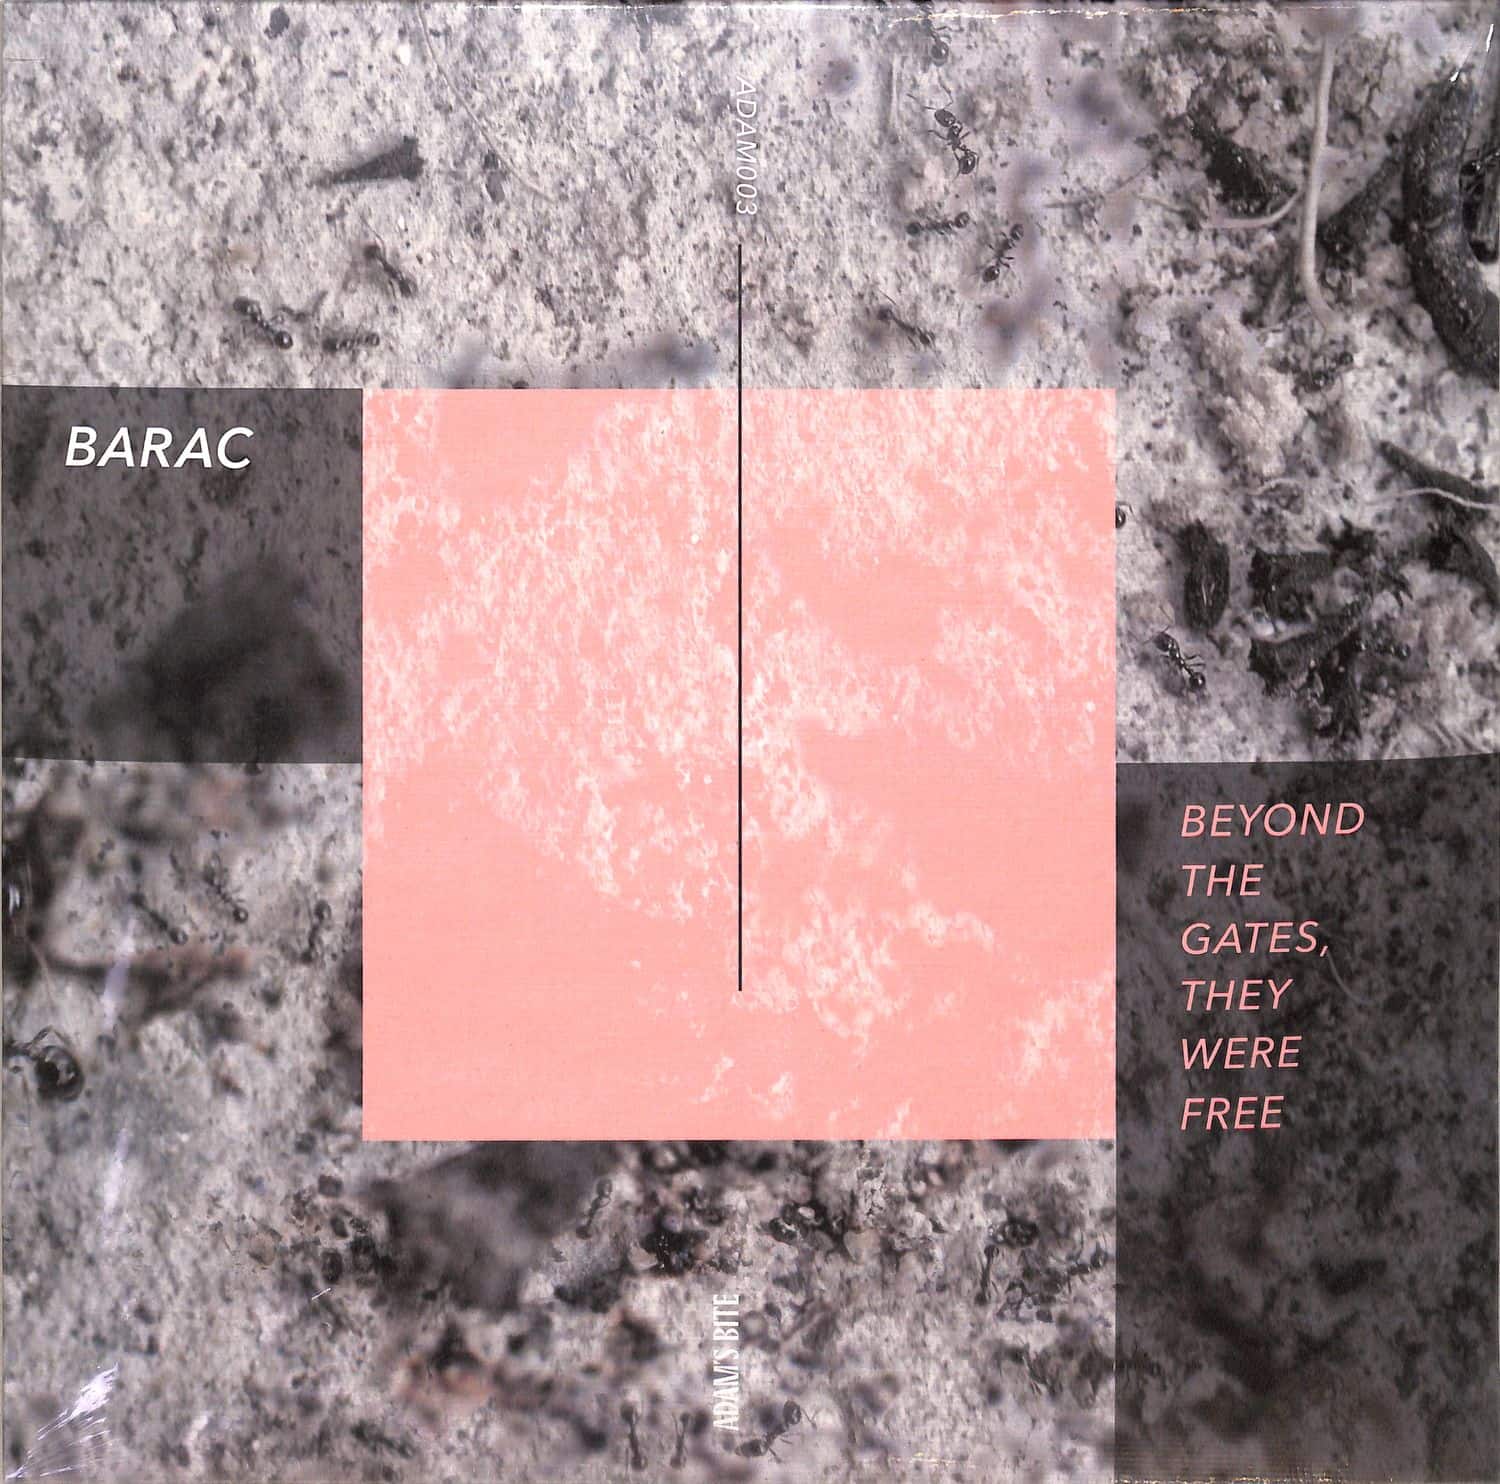 Barac - BEYOND THE GATES, THEY WERE FREE EP 